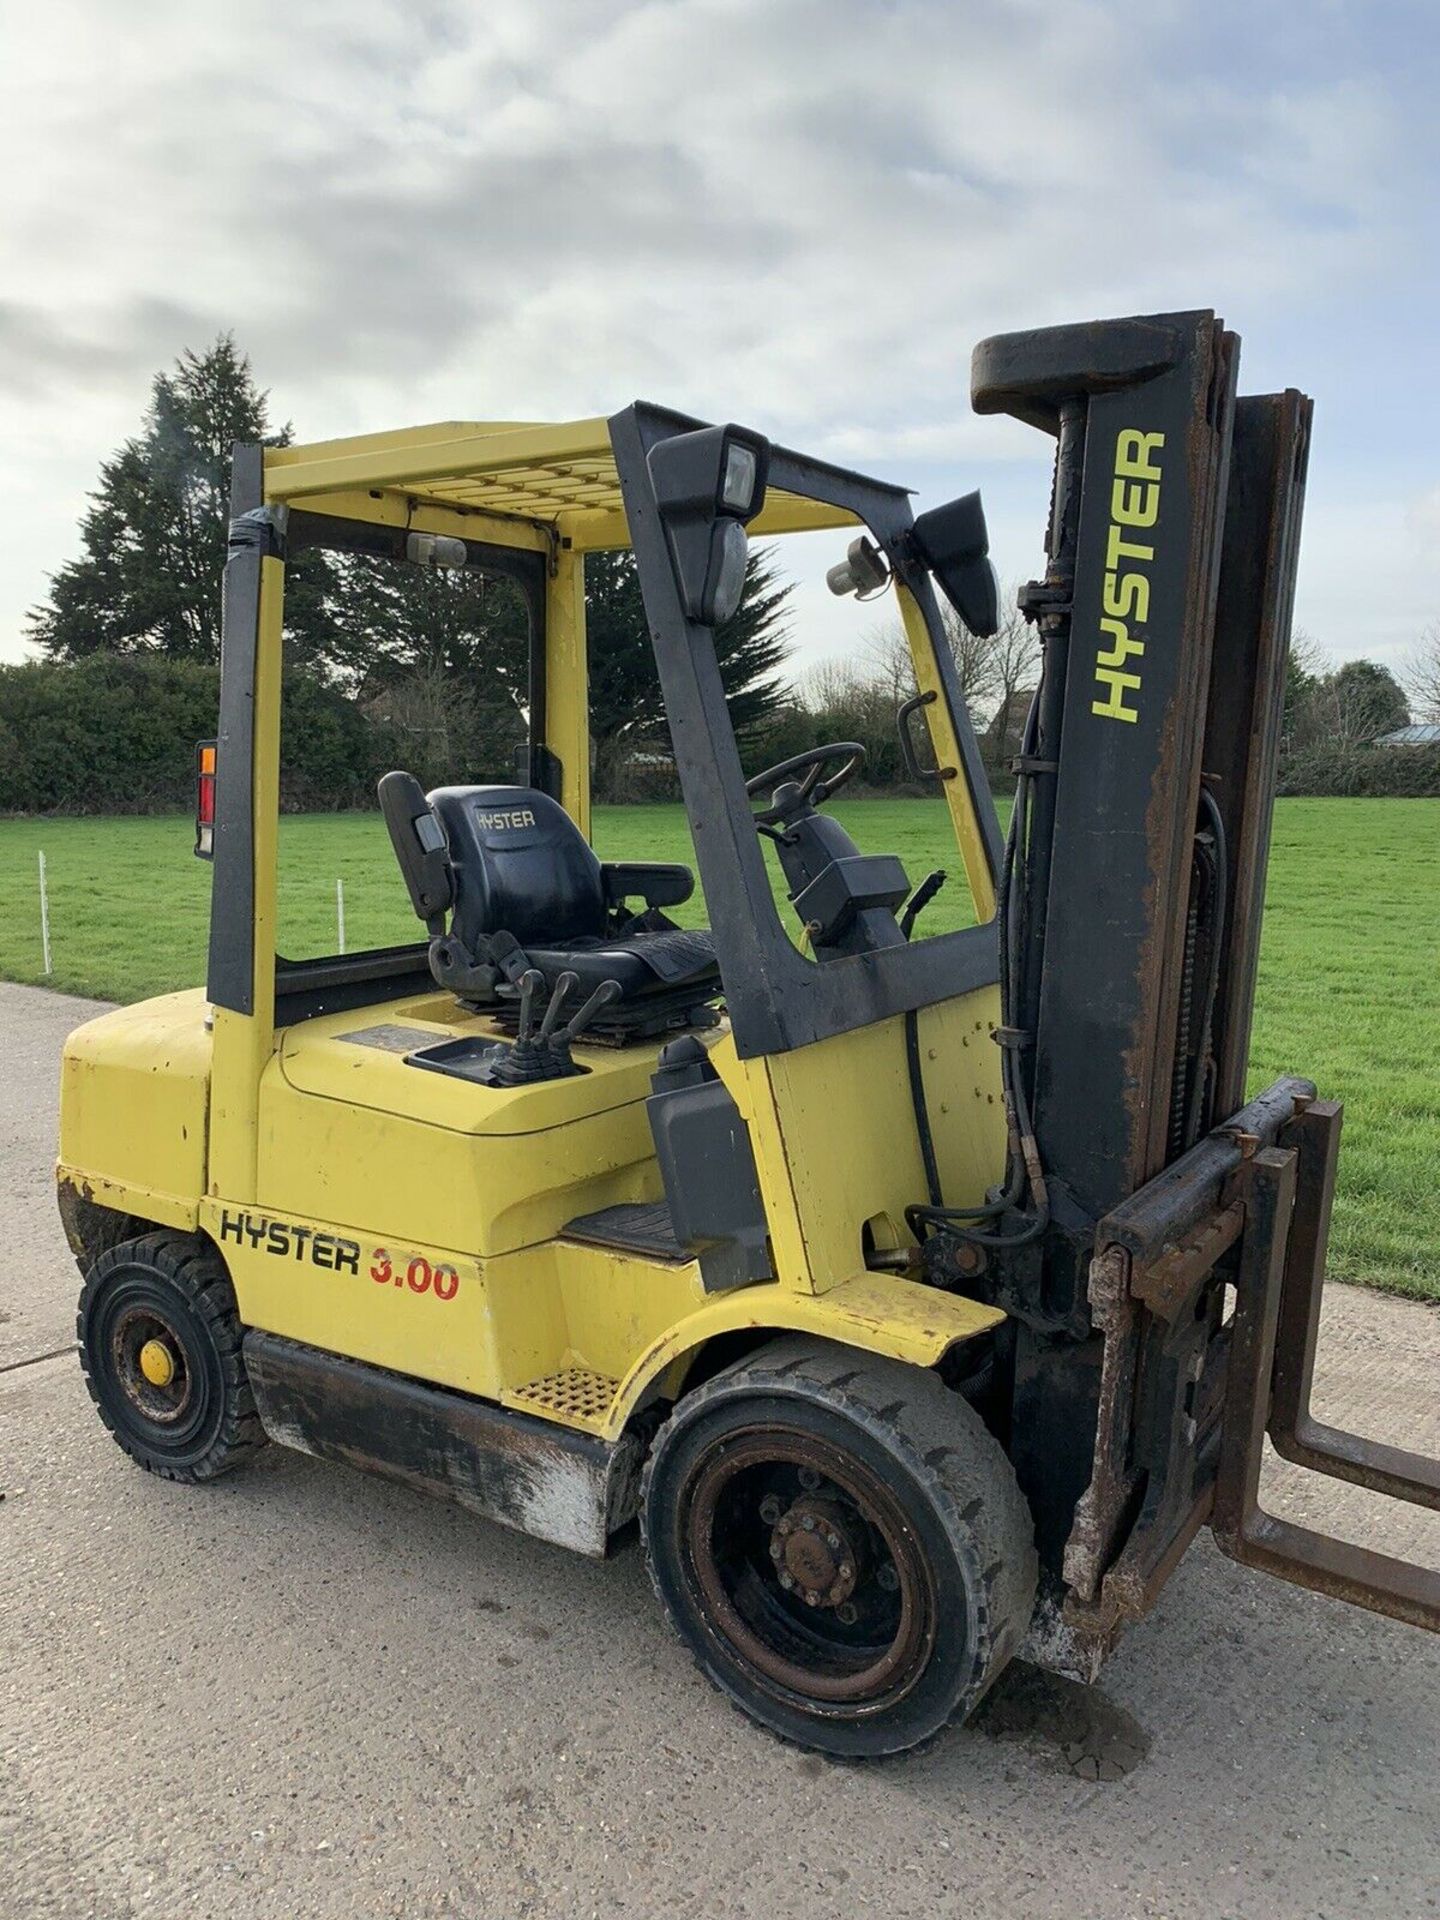 Hyster 3 Tonne Diesel Forklift 4.7 Container Spec Triple Mast - Image 2 of 6